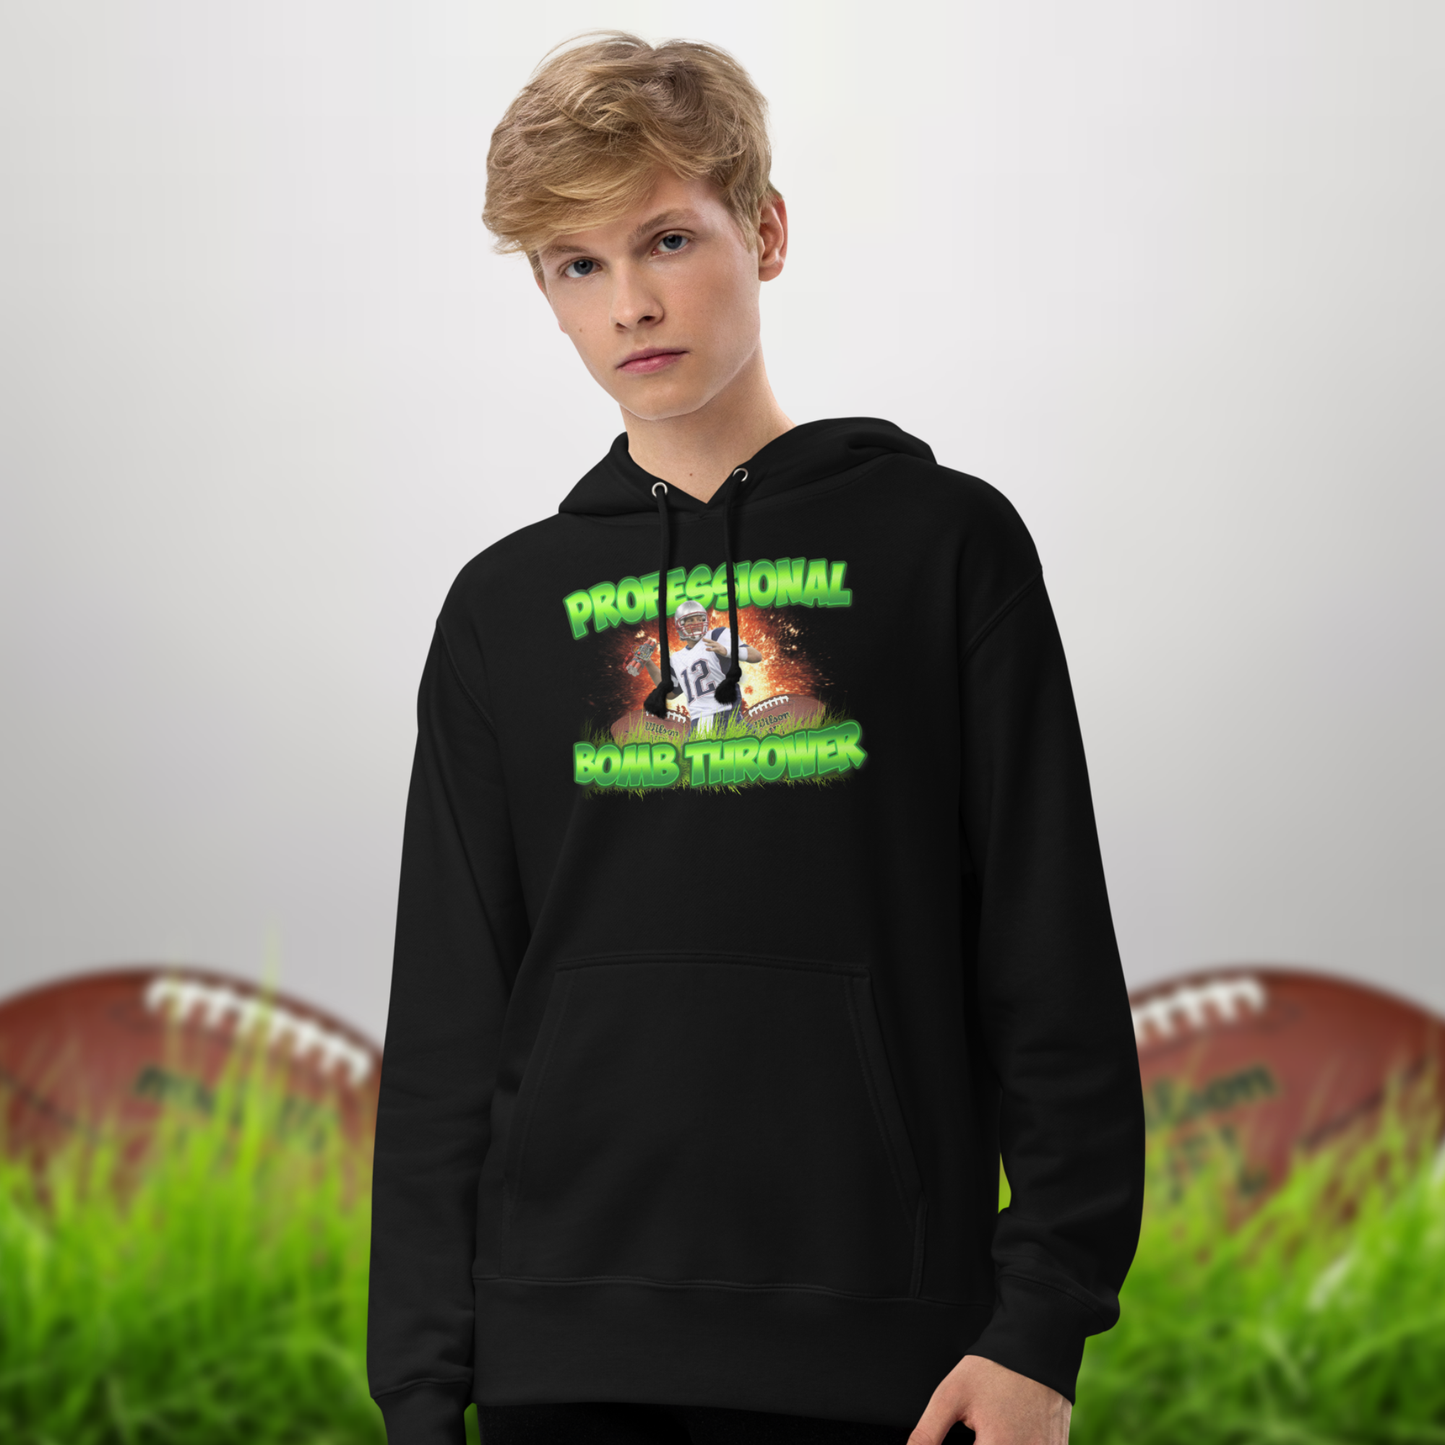 Professional Bomb Thrower Hoodie